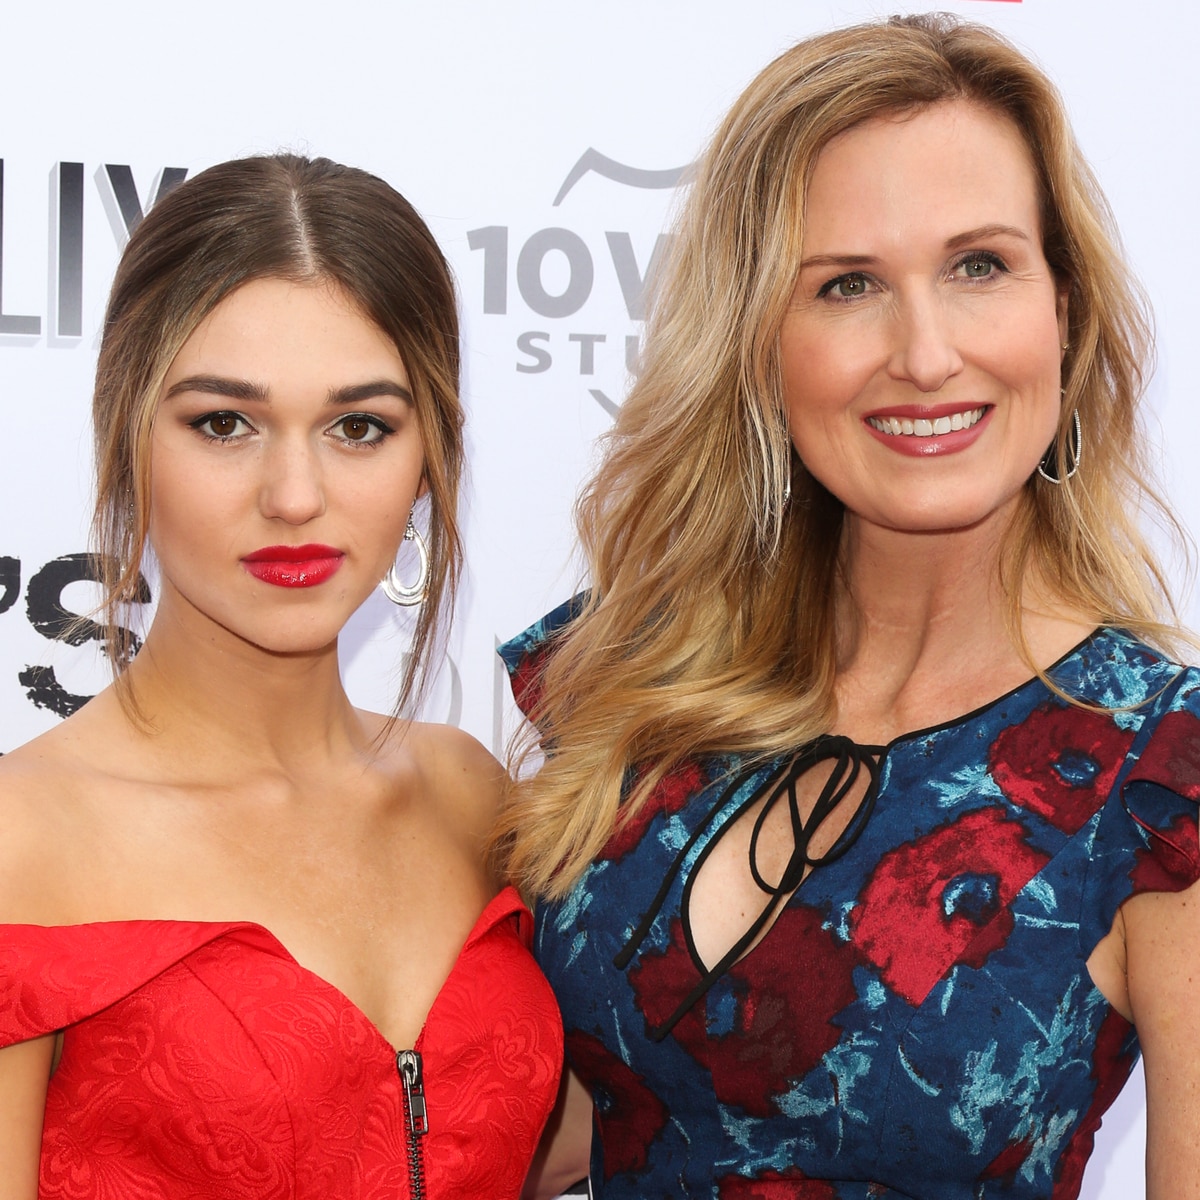 Where Sadie and Korie Robertson Stand With Phils Secret Daughter - E! Online pic